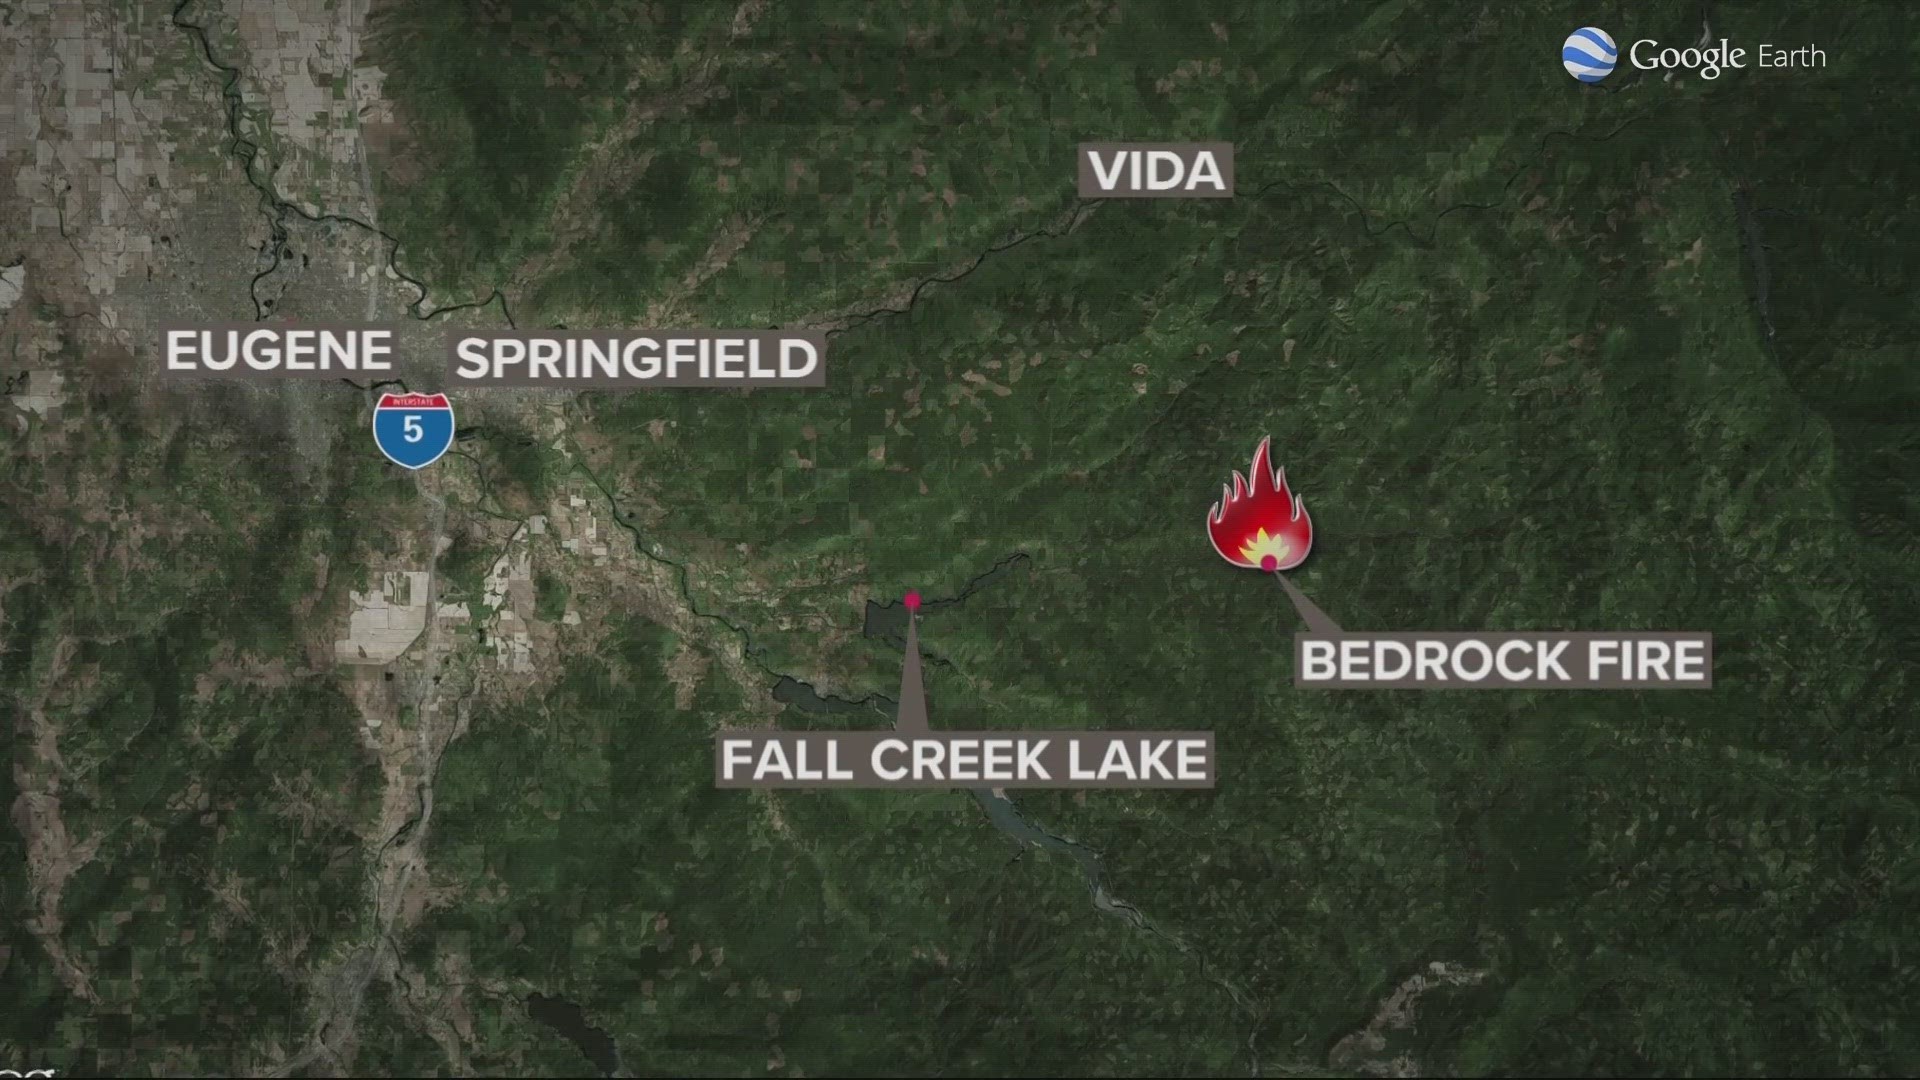 The fire is burning near the Bedrock Campground in the Fall Creek area southeast of Eugene.